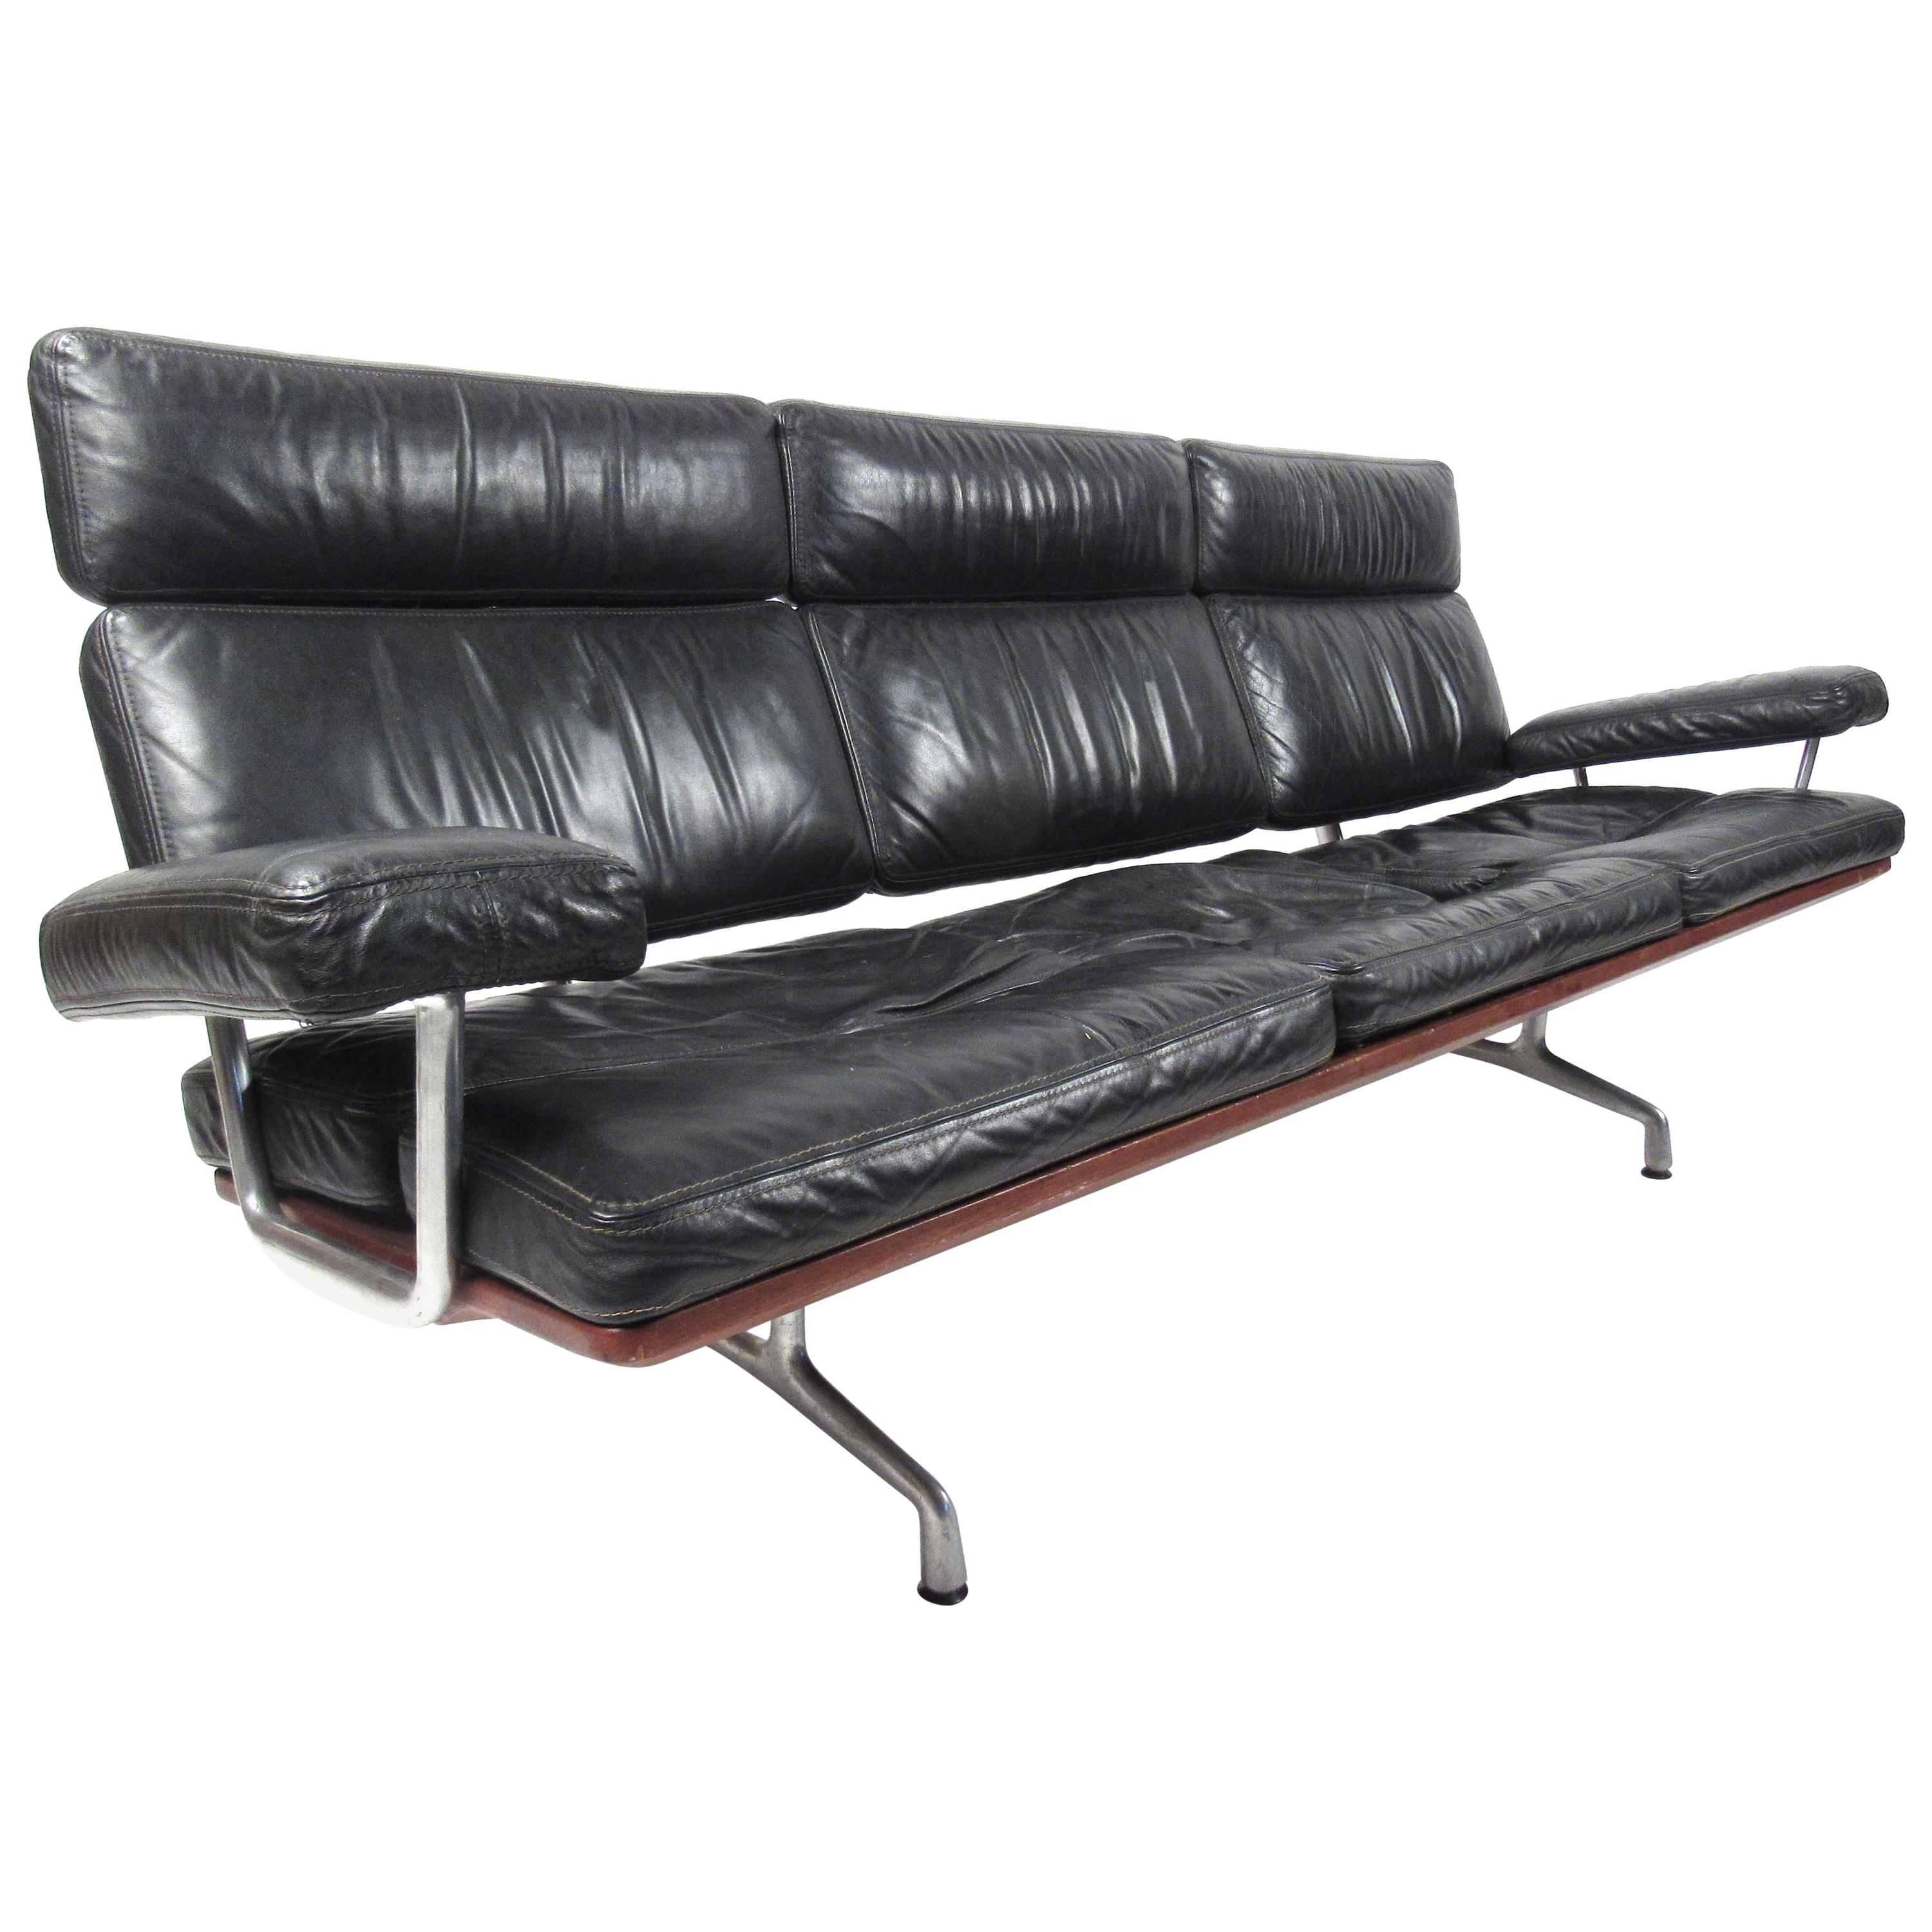 Sofa Model 3473 by Charles and Ray Eames for Herman Miller